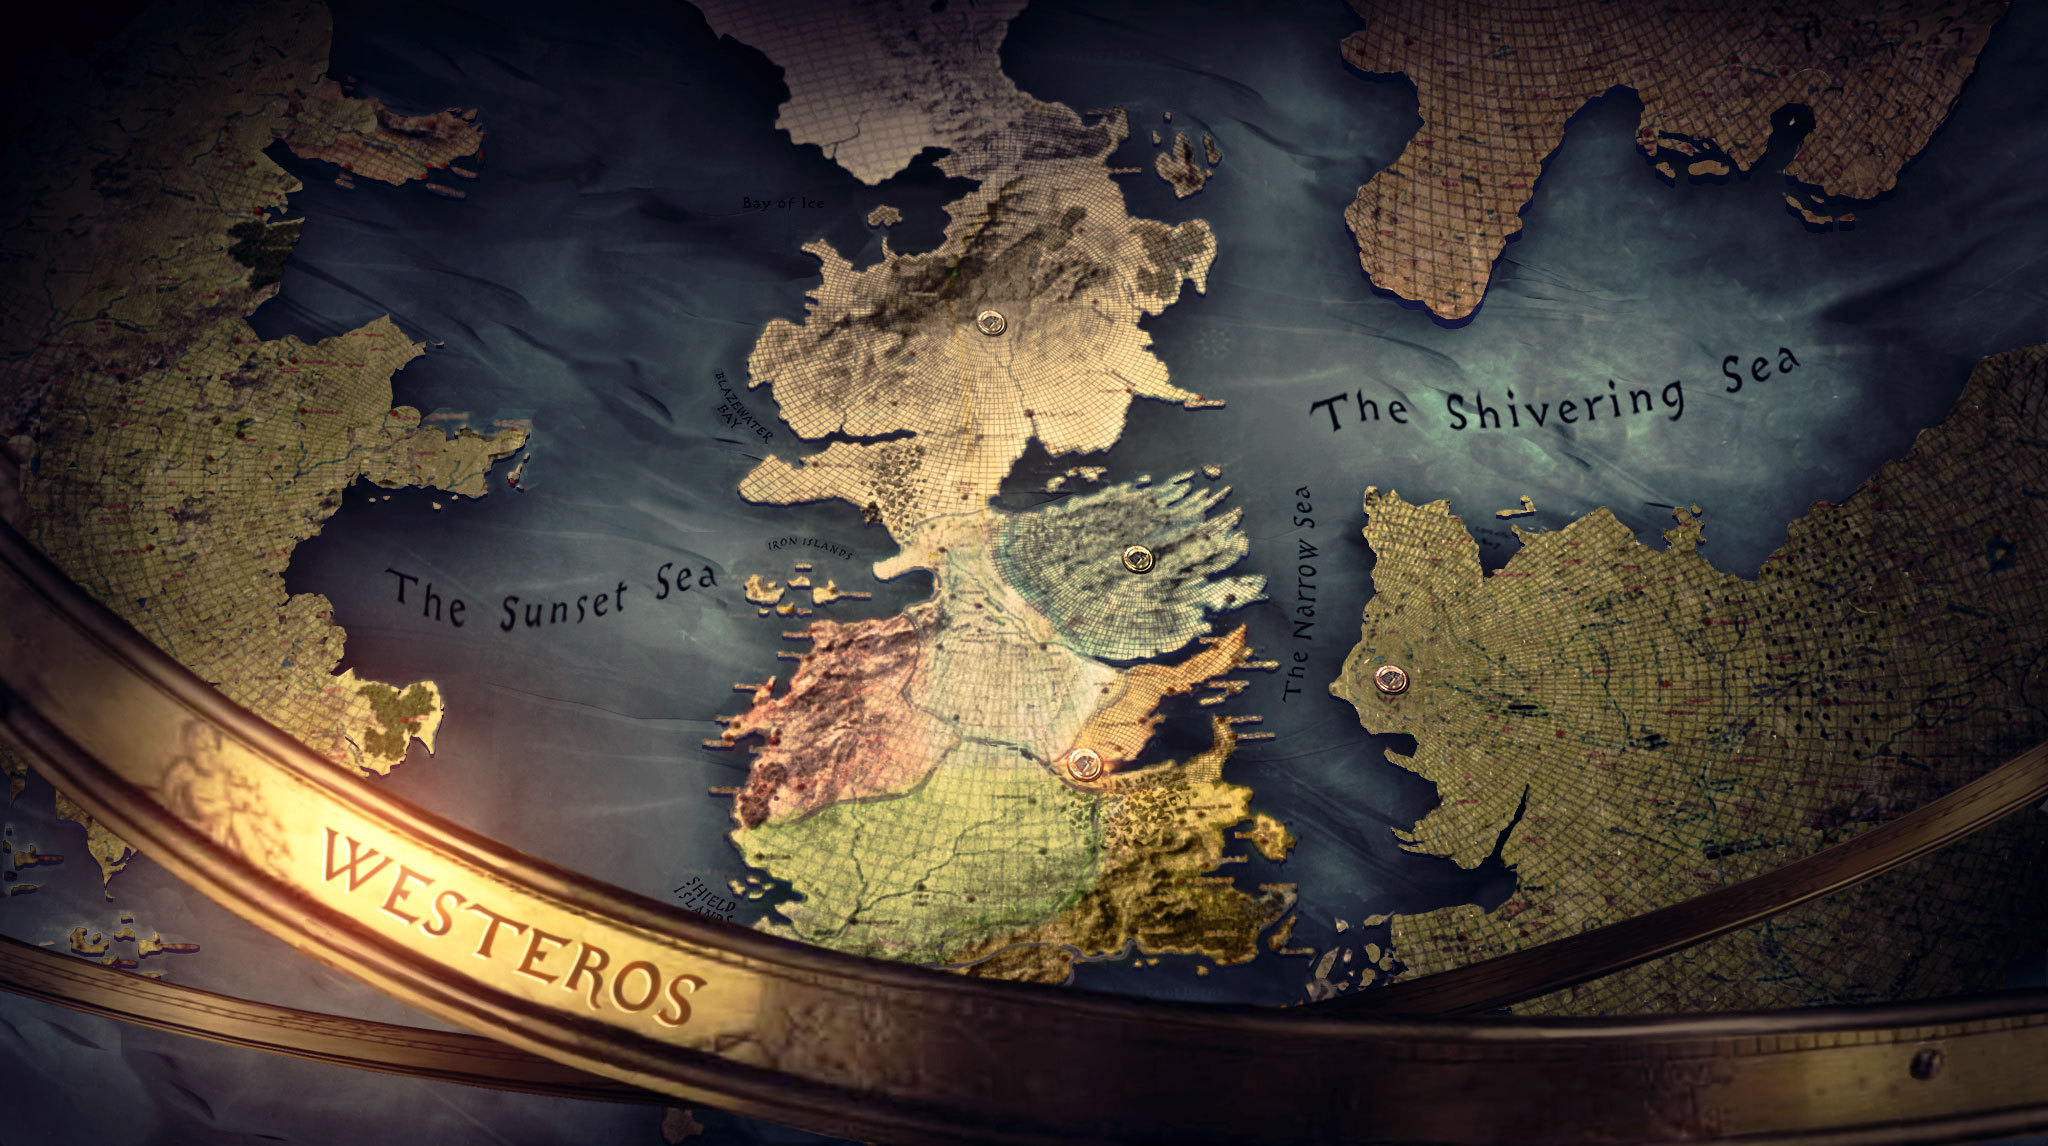 Game Of Thrones Image The Seven Kingdoms HD Wallpaper And